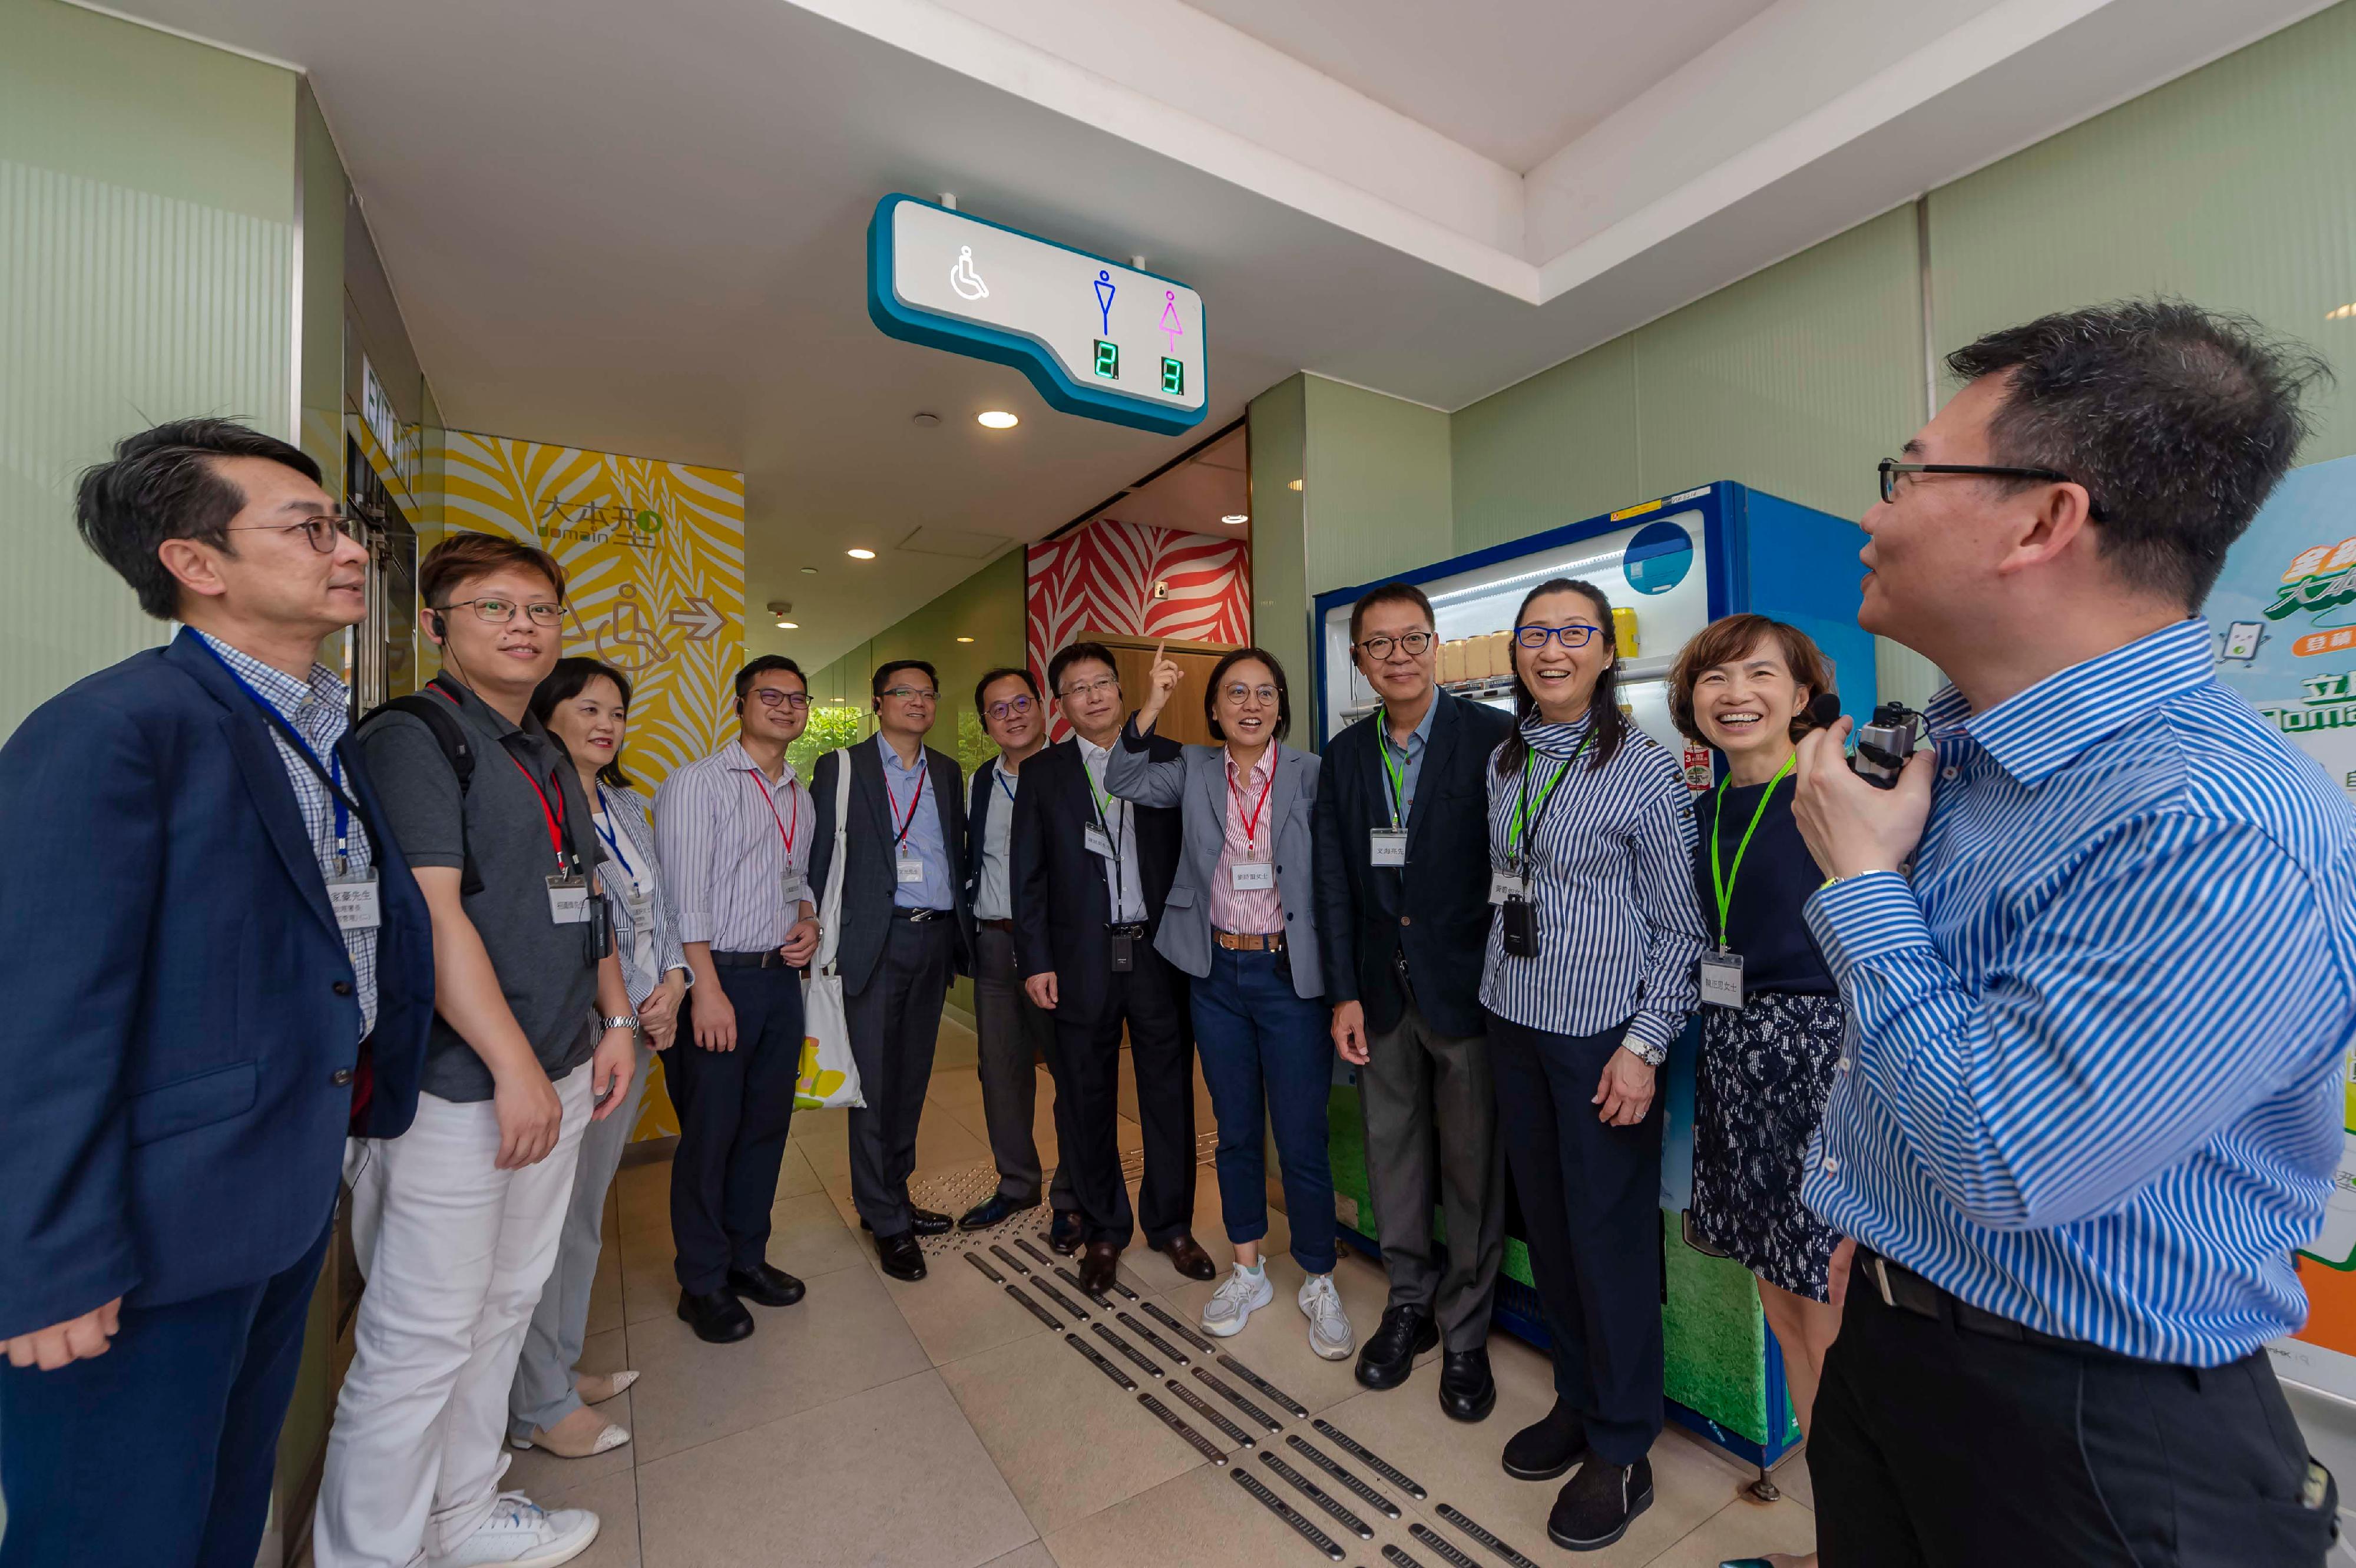 Members of the Hong Kong Housing Authority (HA) and its Commercial Properties Committee (CPC) today (June 20) visited the HA's flagship shopping mall, Domain, in Yau Tong. Photo shows the Chairman of the CPC, Ms Serena Lau (fifth right), members of the HA/CPC and officials of the Housing Department inspecting the new occupancy indicators outside a renovated washroom of the mall.